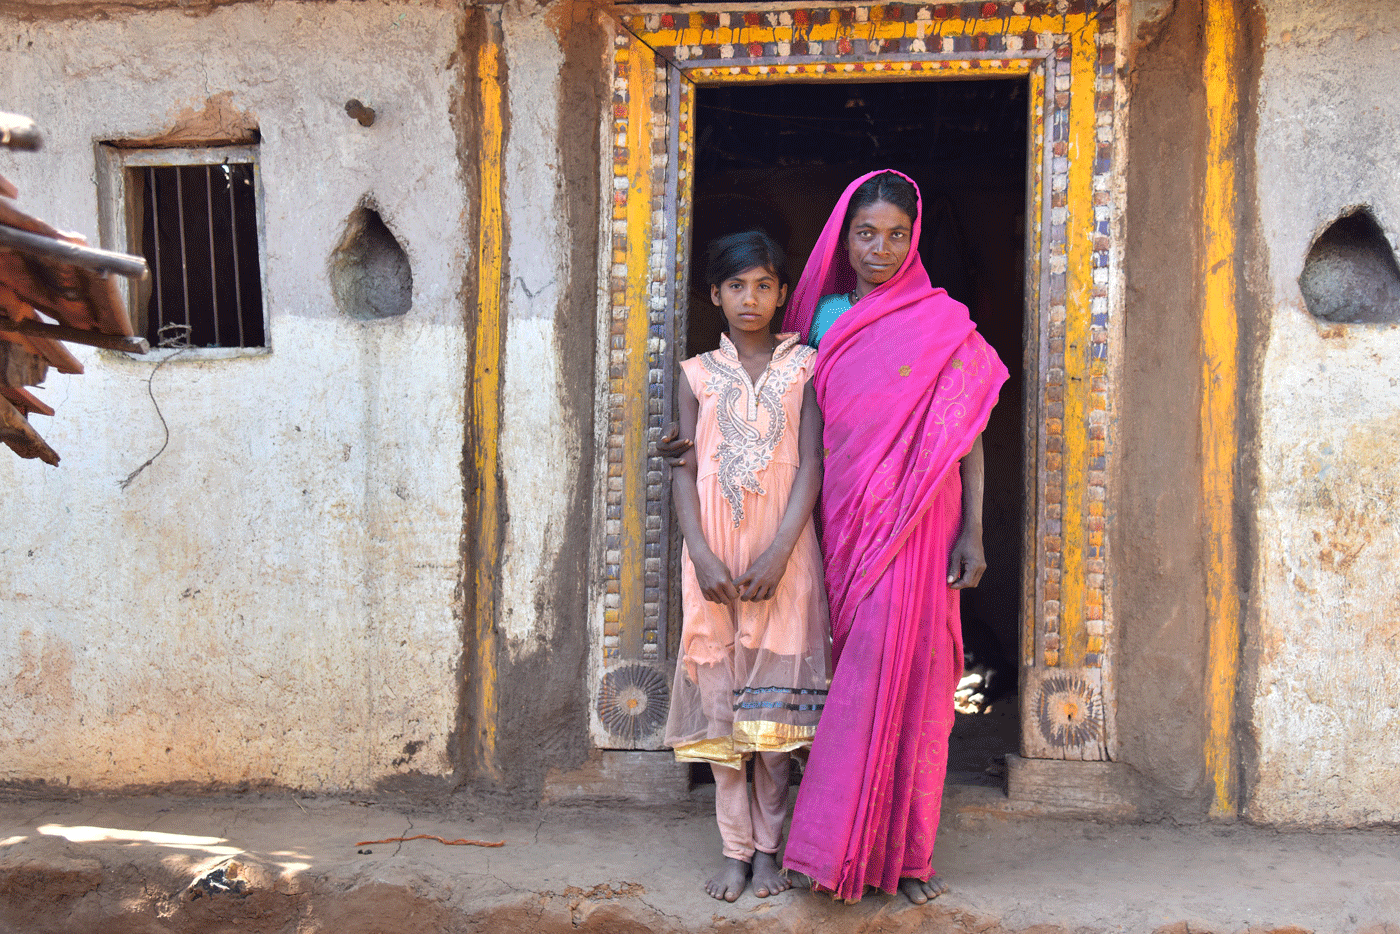 Two women in front of a house